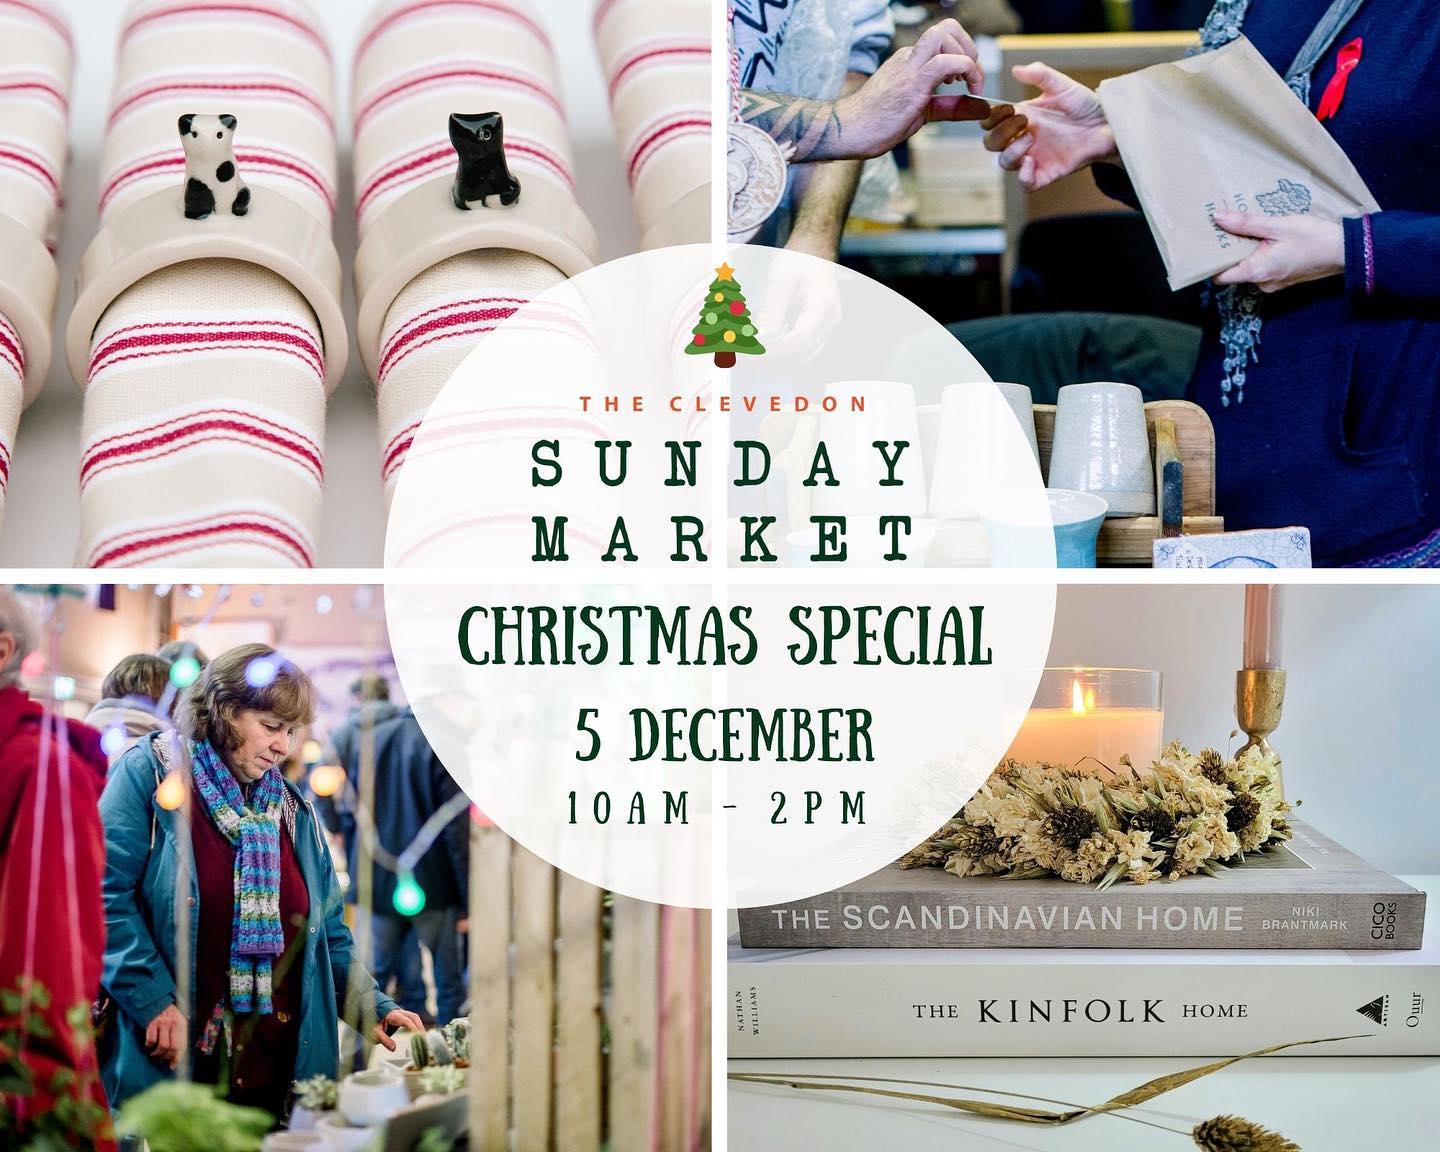 We have 9 more events this year! Really looking forward to them all  one of our regular markets and one we adore taking part in is the @clevedonsundaymarket find us there on December the 5th!